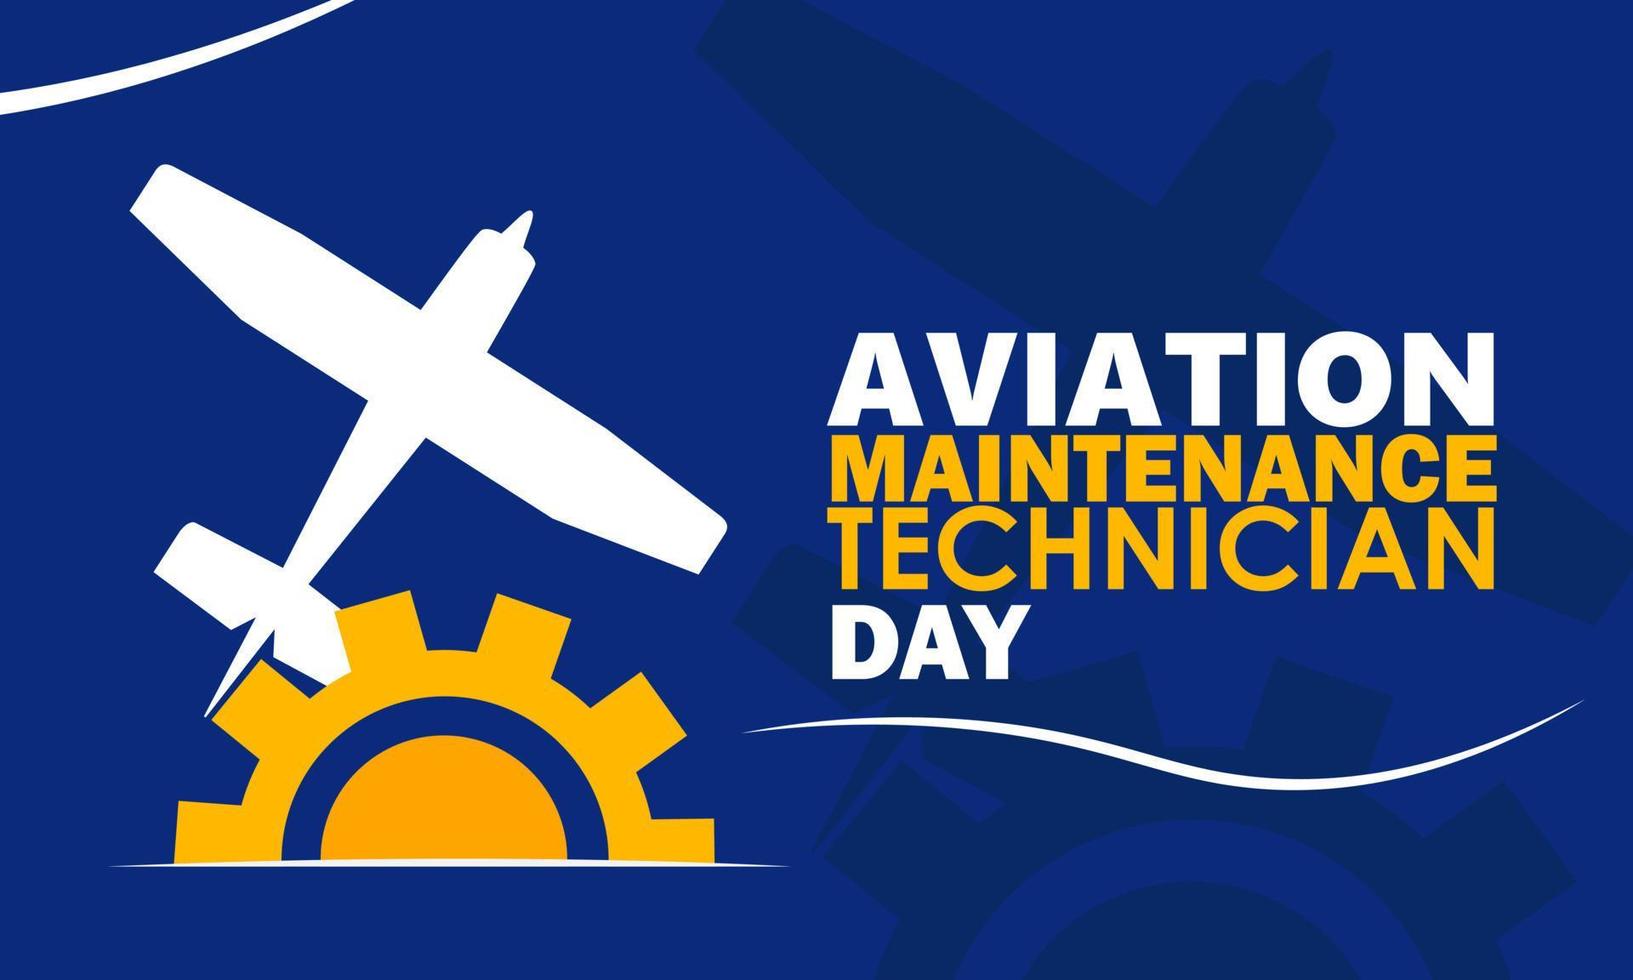 BAviation Maintenance Technician Day. May 24. Holiday concept. Template for background, banner, card, poster vector